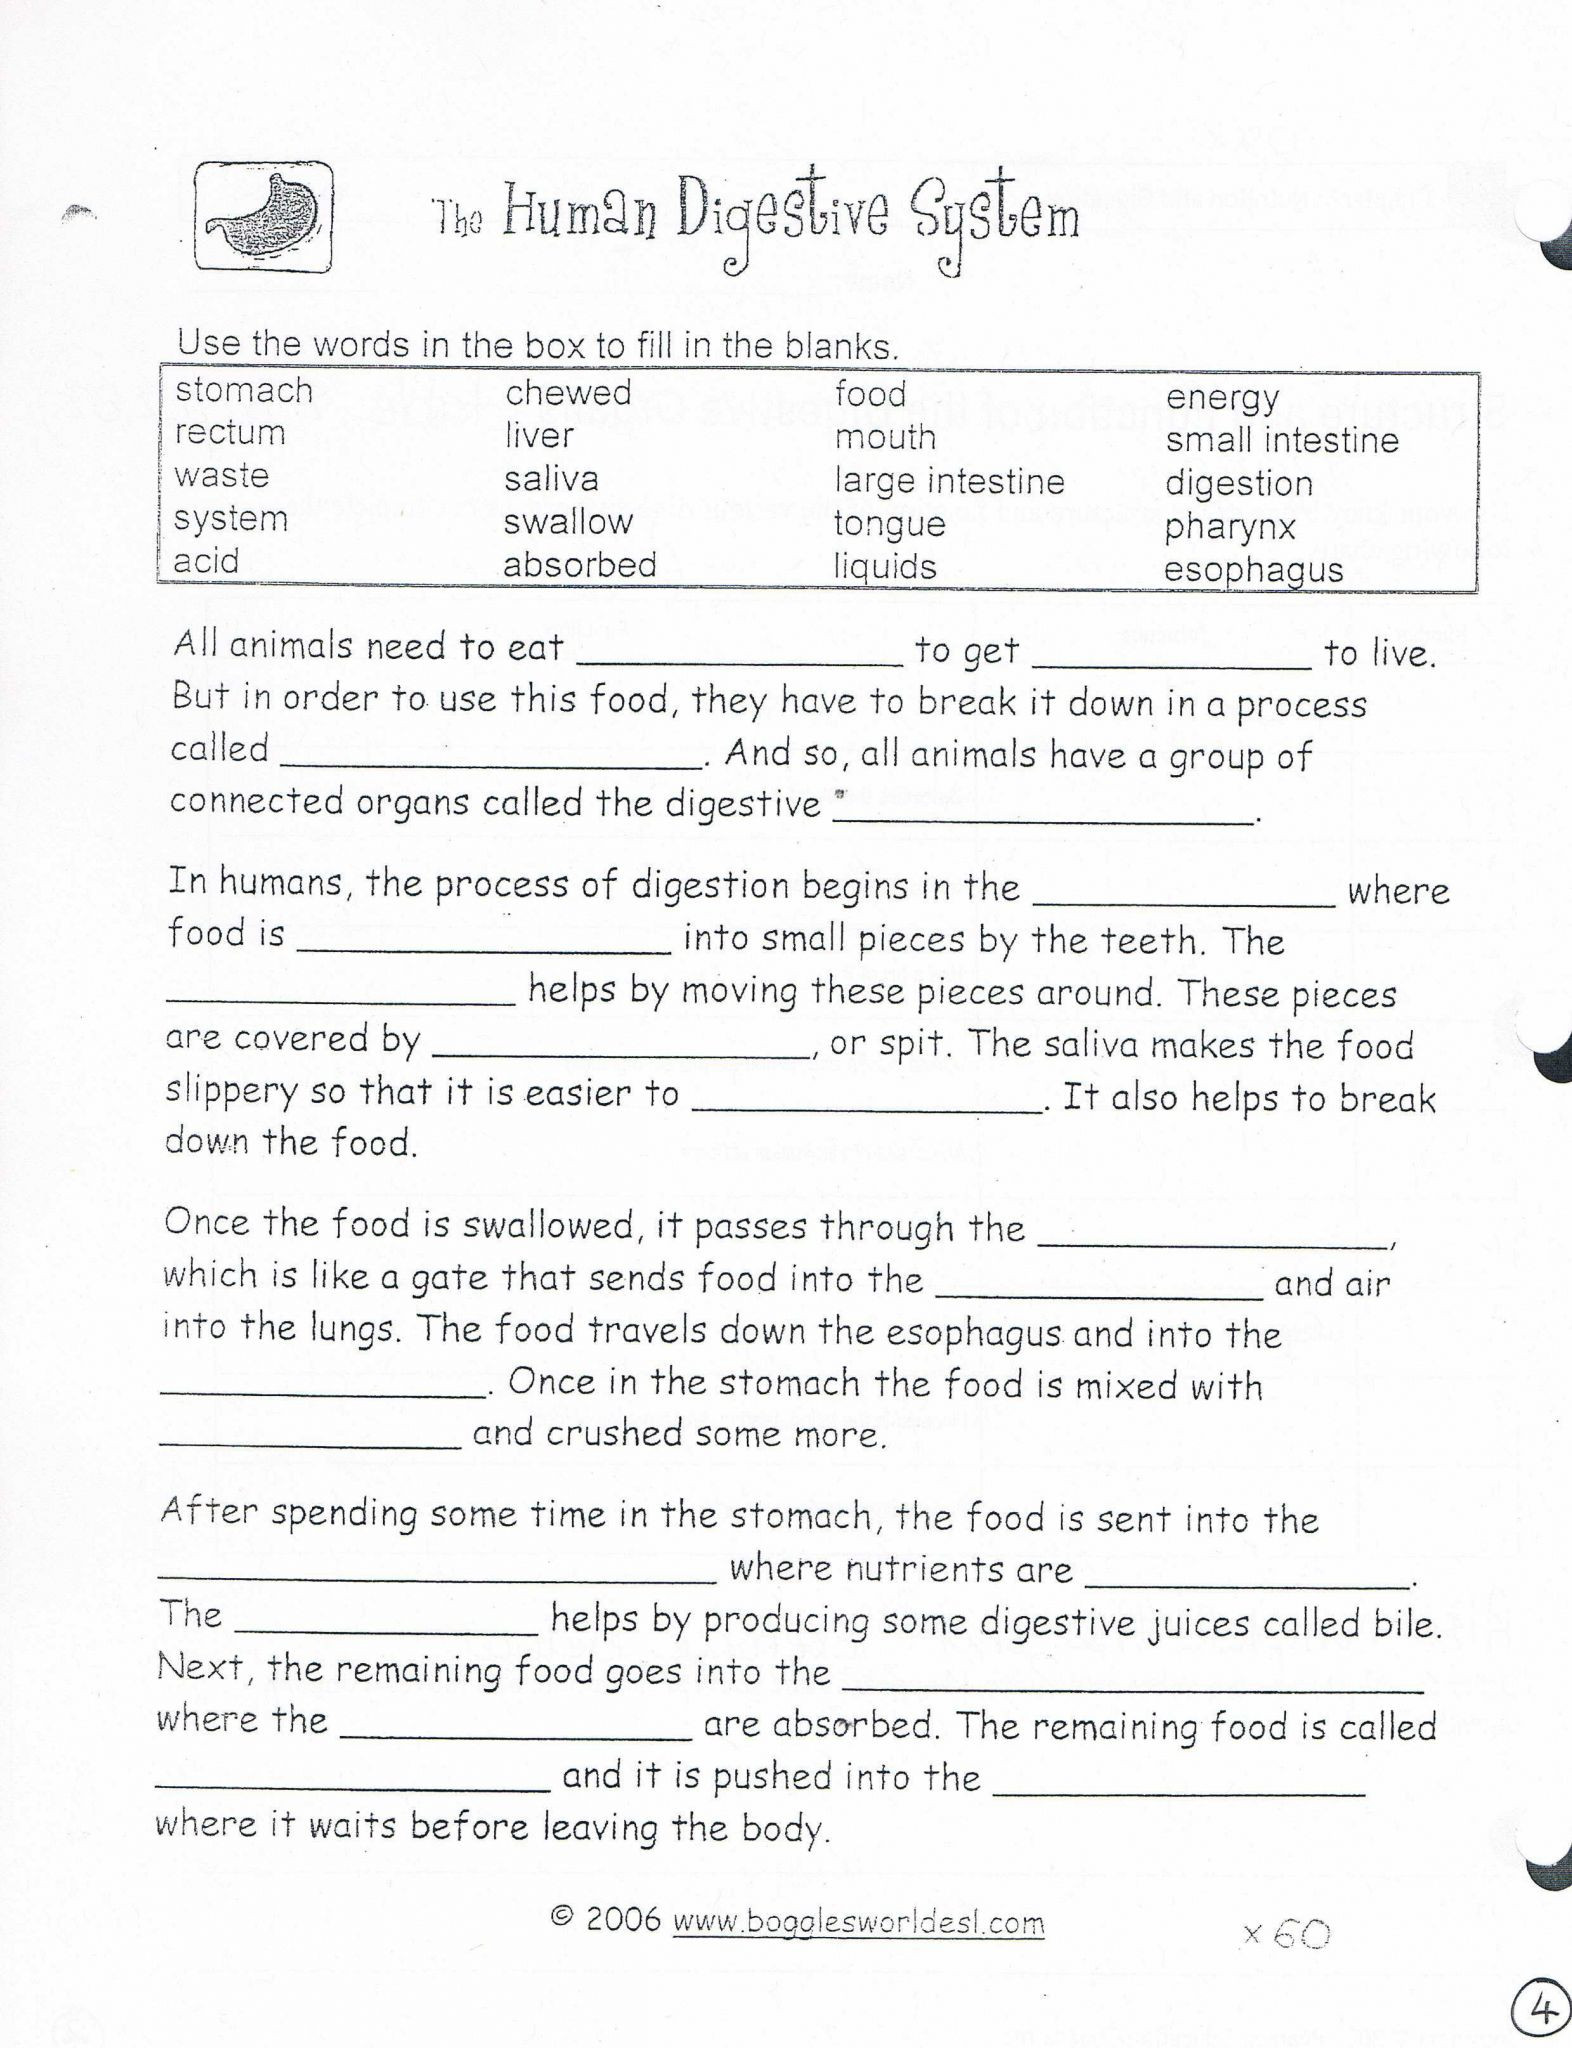 Digestive System Worksheet Answers Easy Digestive System Worksheet